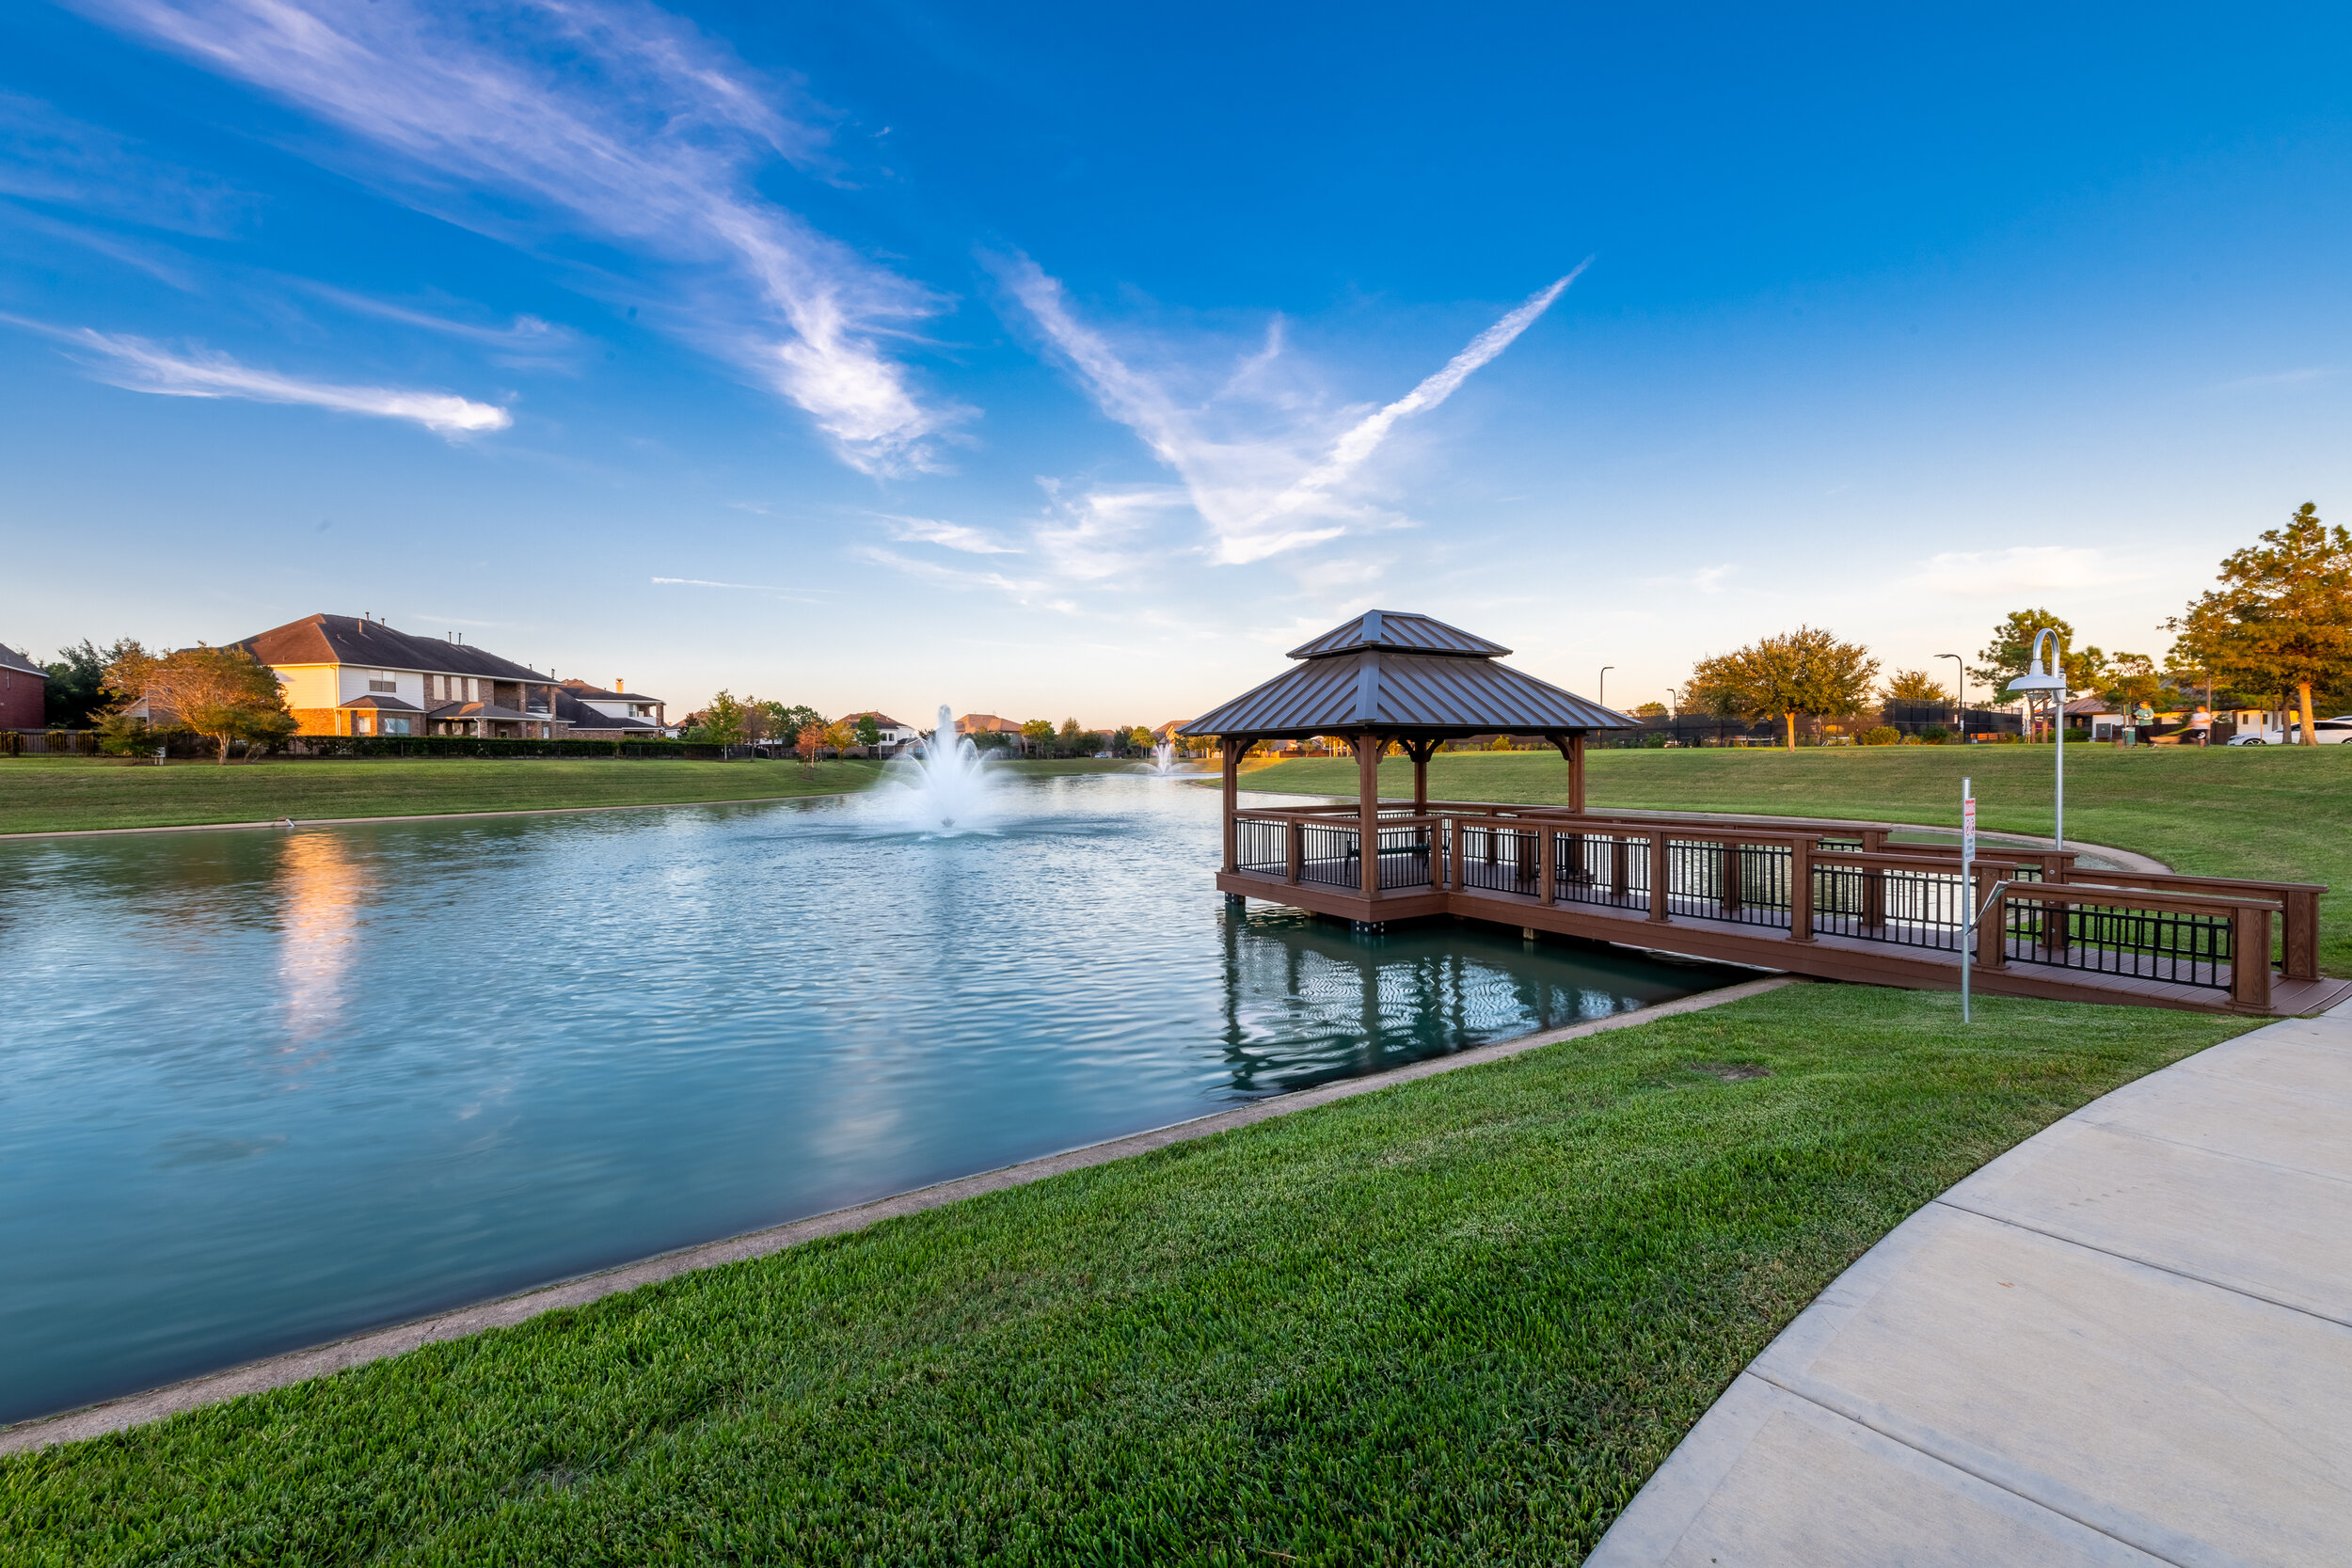  Real Estate Photography can include neighborhood amenity pictures, which can really enhance a listing!  Ask about adding these to your package for a small fee. 